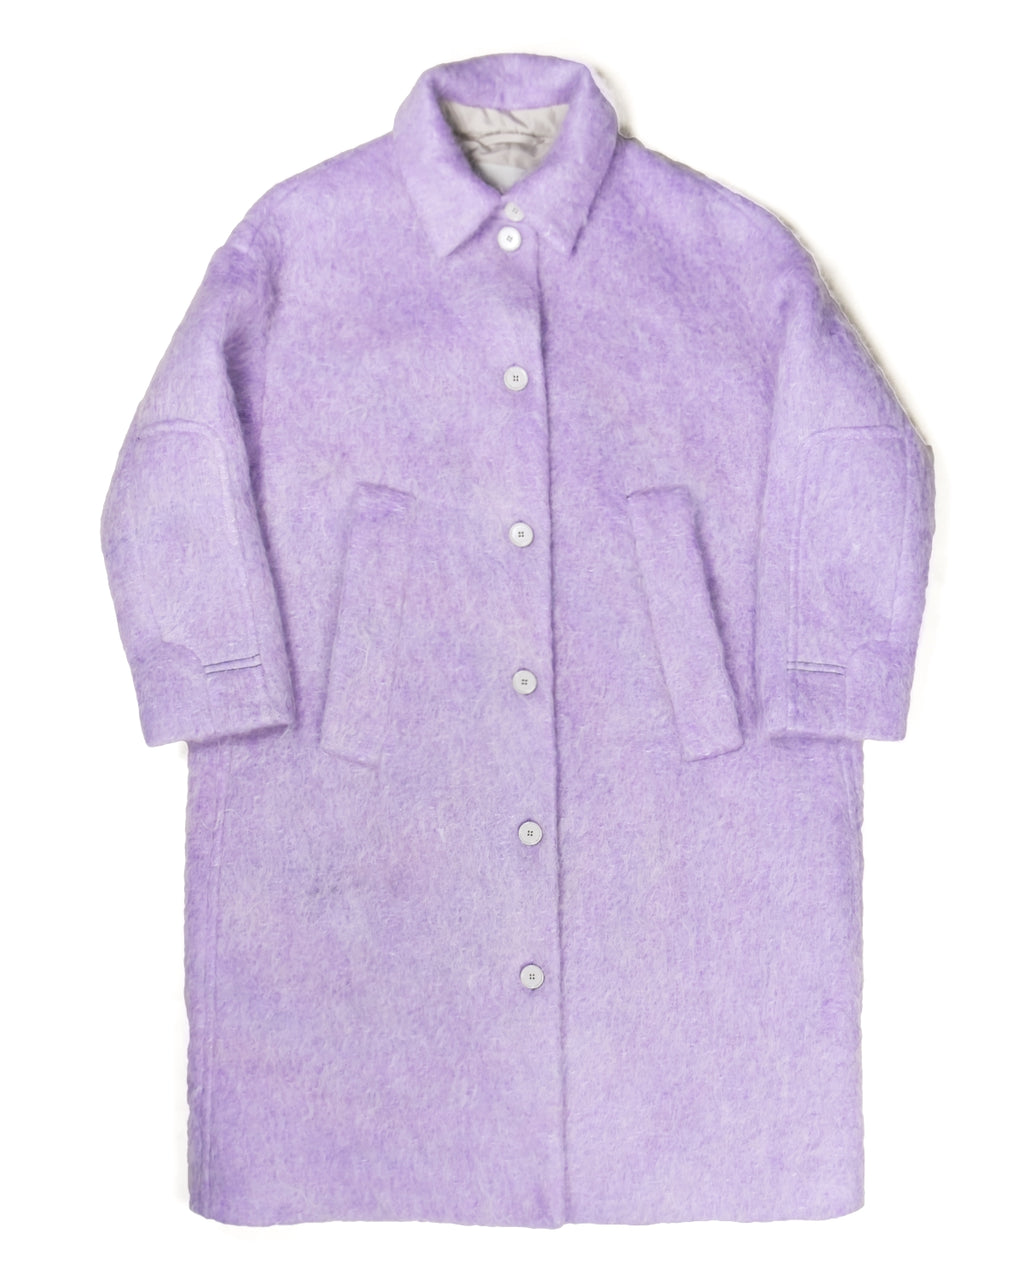 T-Coat Women's Wooly Lavender Overcoat Made in Italy